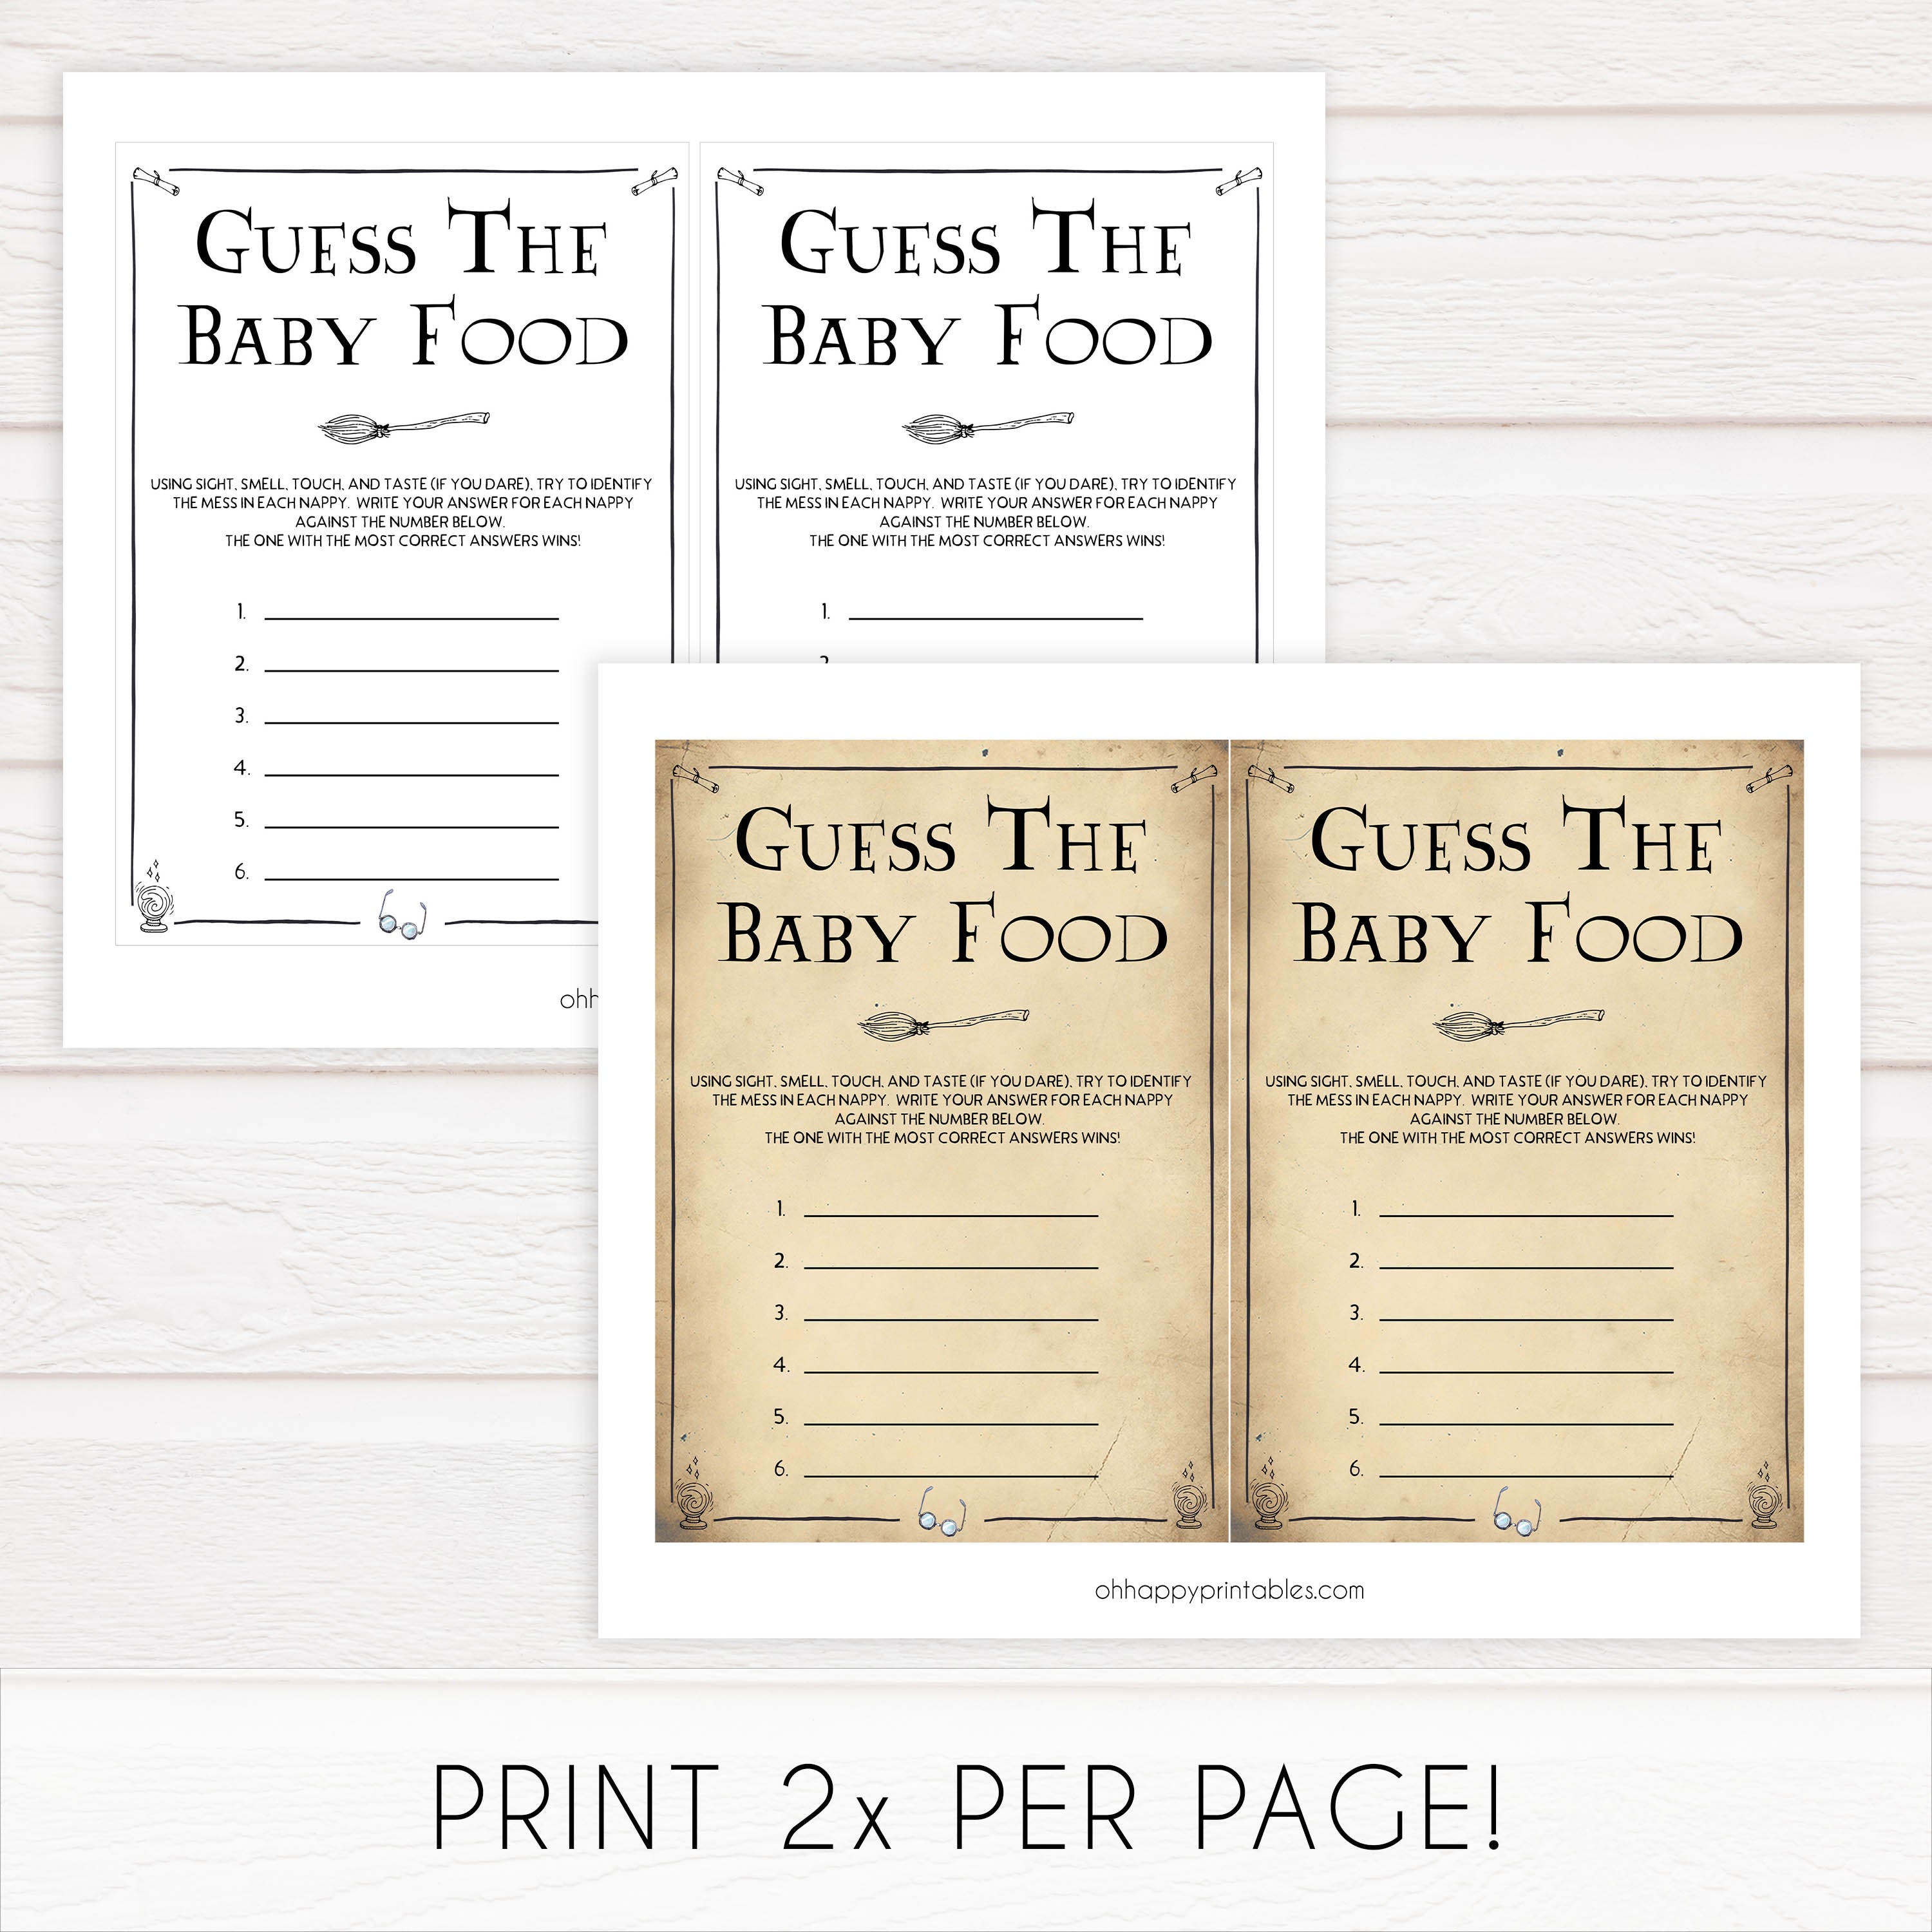 Guess The Sweet Mess Baby Game, Wizard baby shower games, printable baby shower games, Harry Potter baby games, Harry Potter baby shower, fun baby shower games,  fun baby ideas